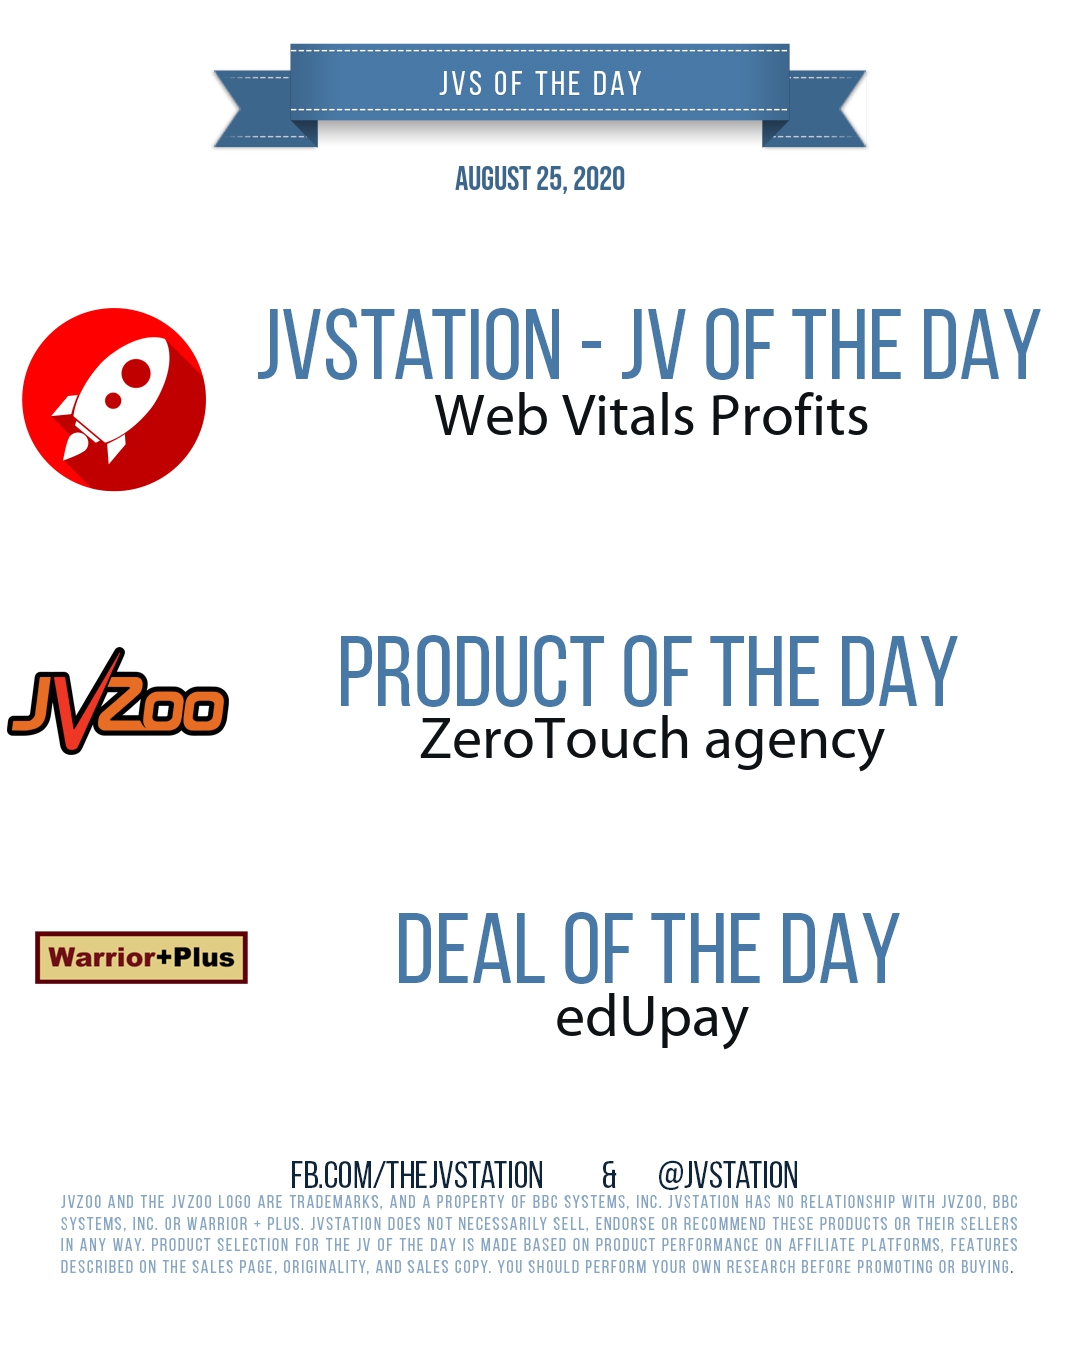 JVs of the day - August 25, 2020